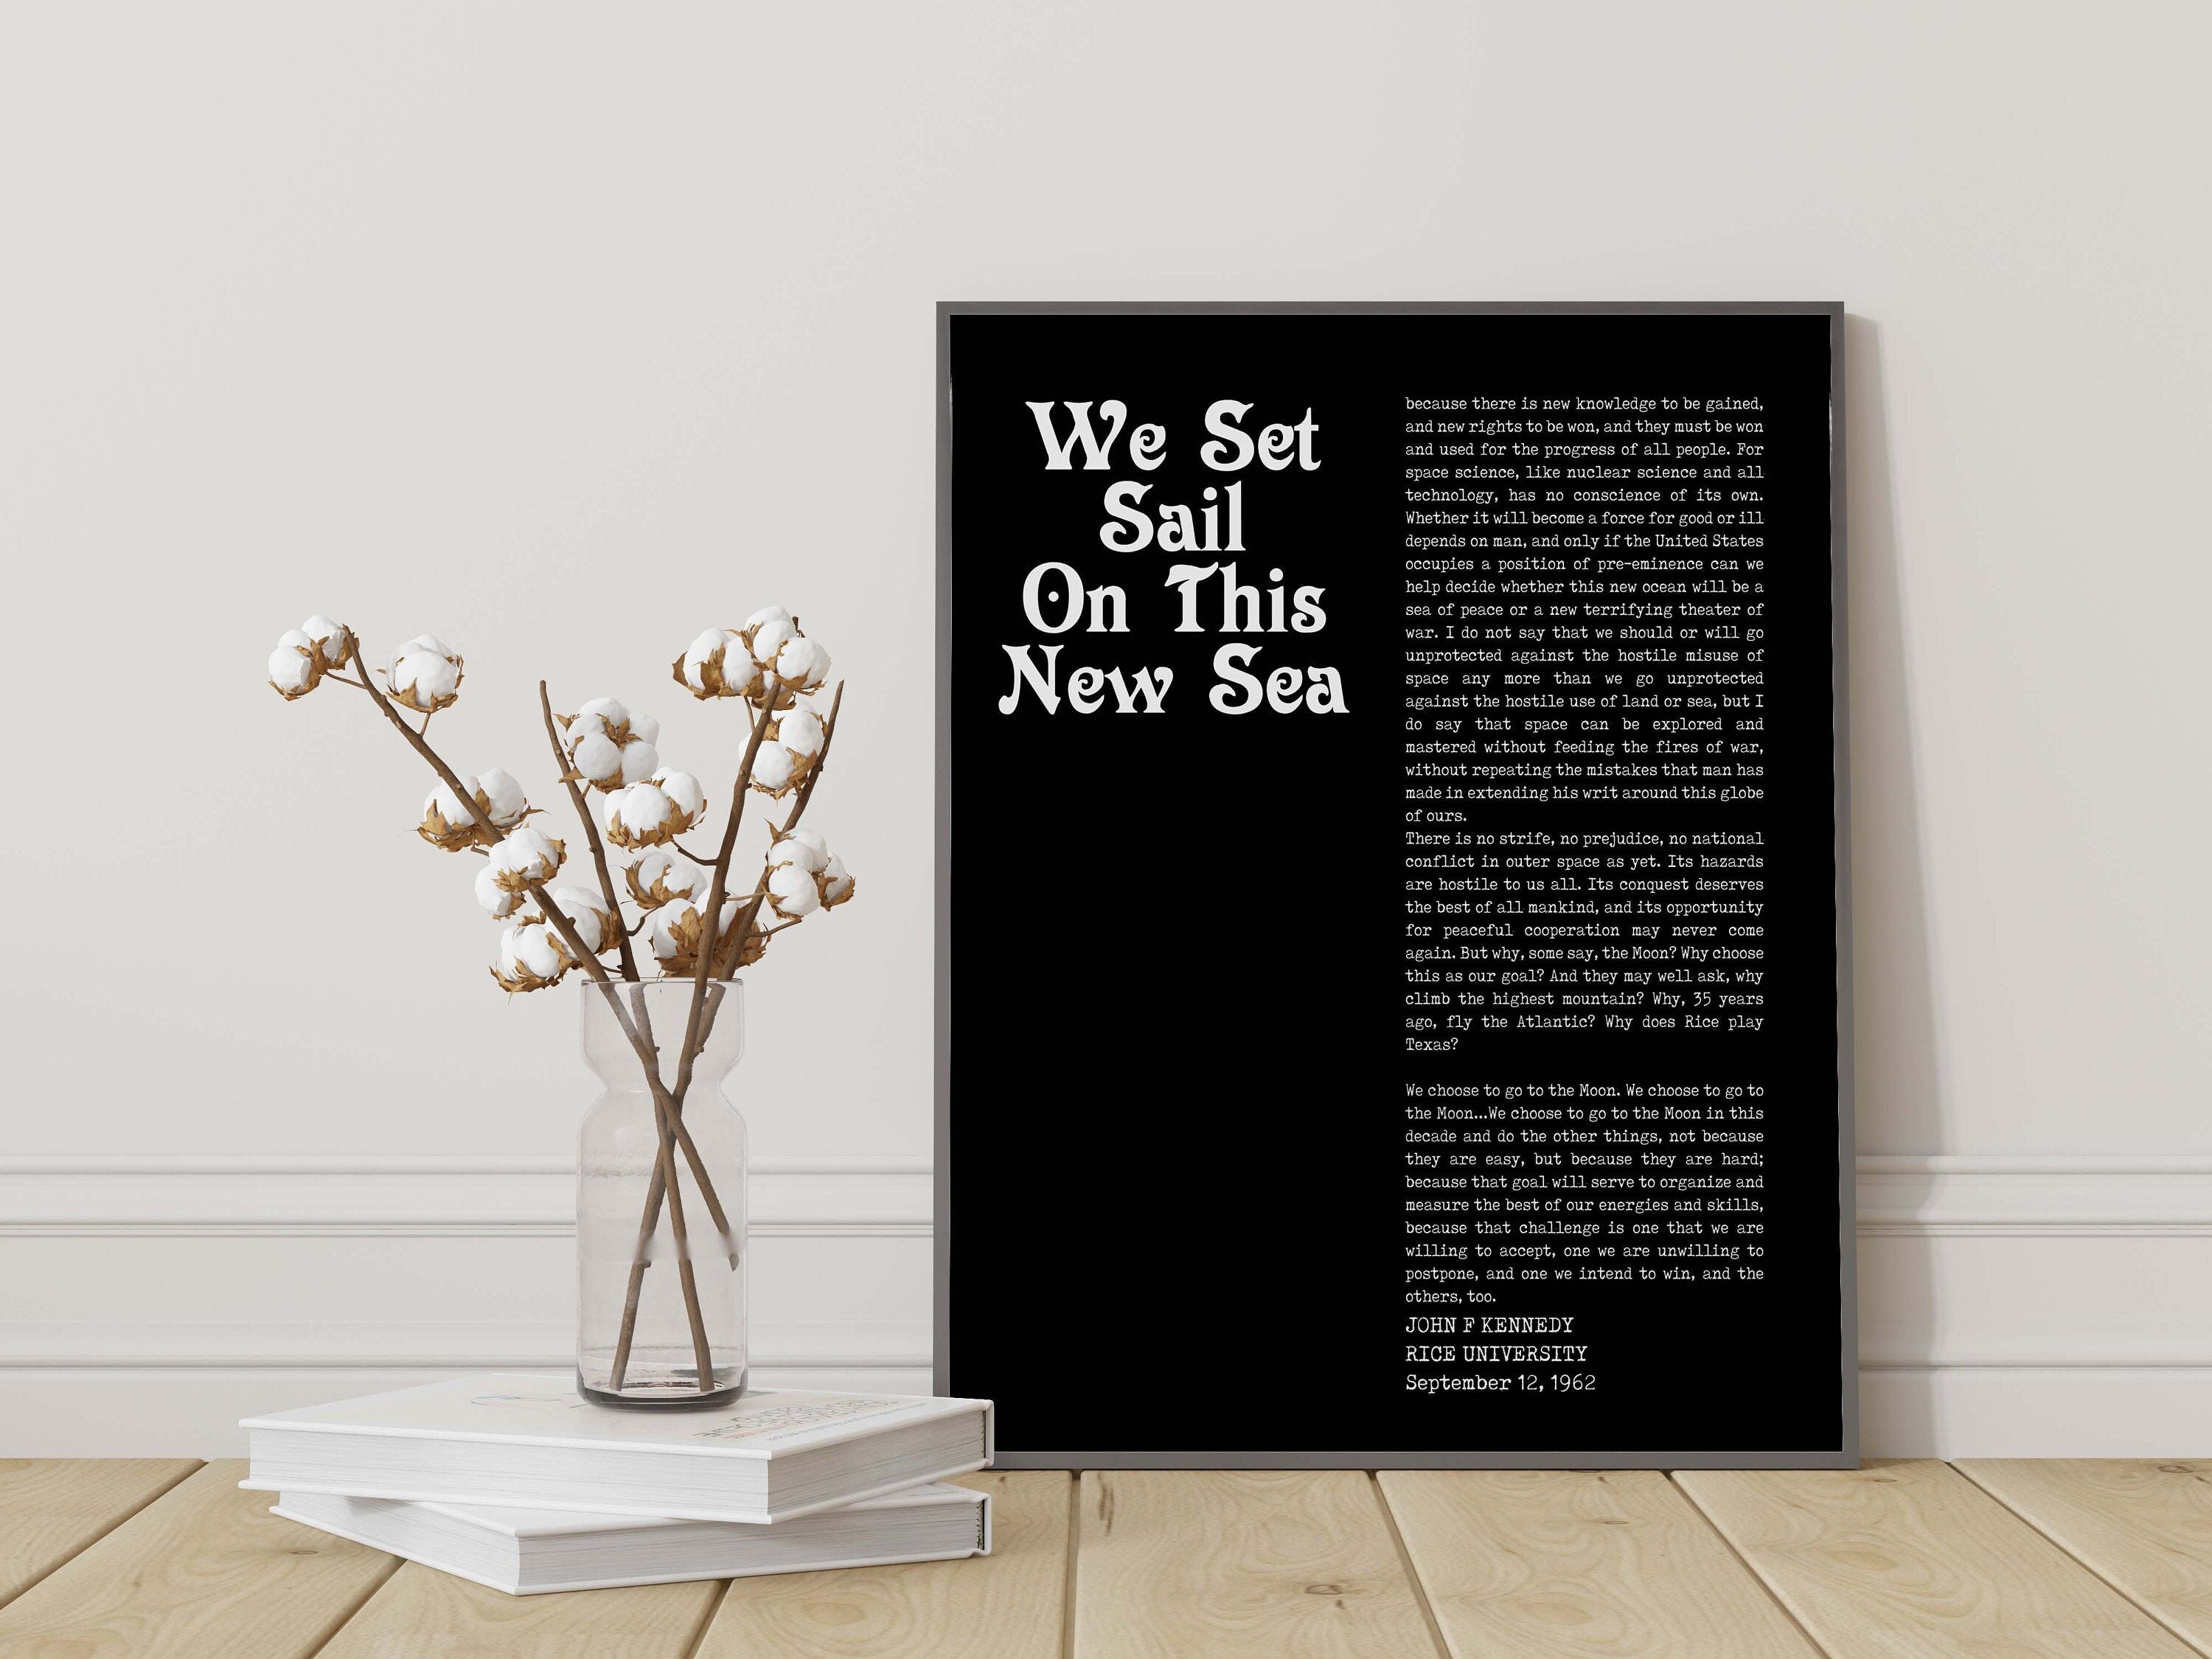 John F. Kennedy quote print, We choose to go to the moon inspirational art, unframed minimalist black & white wall decor